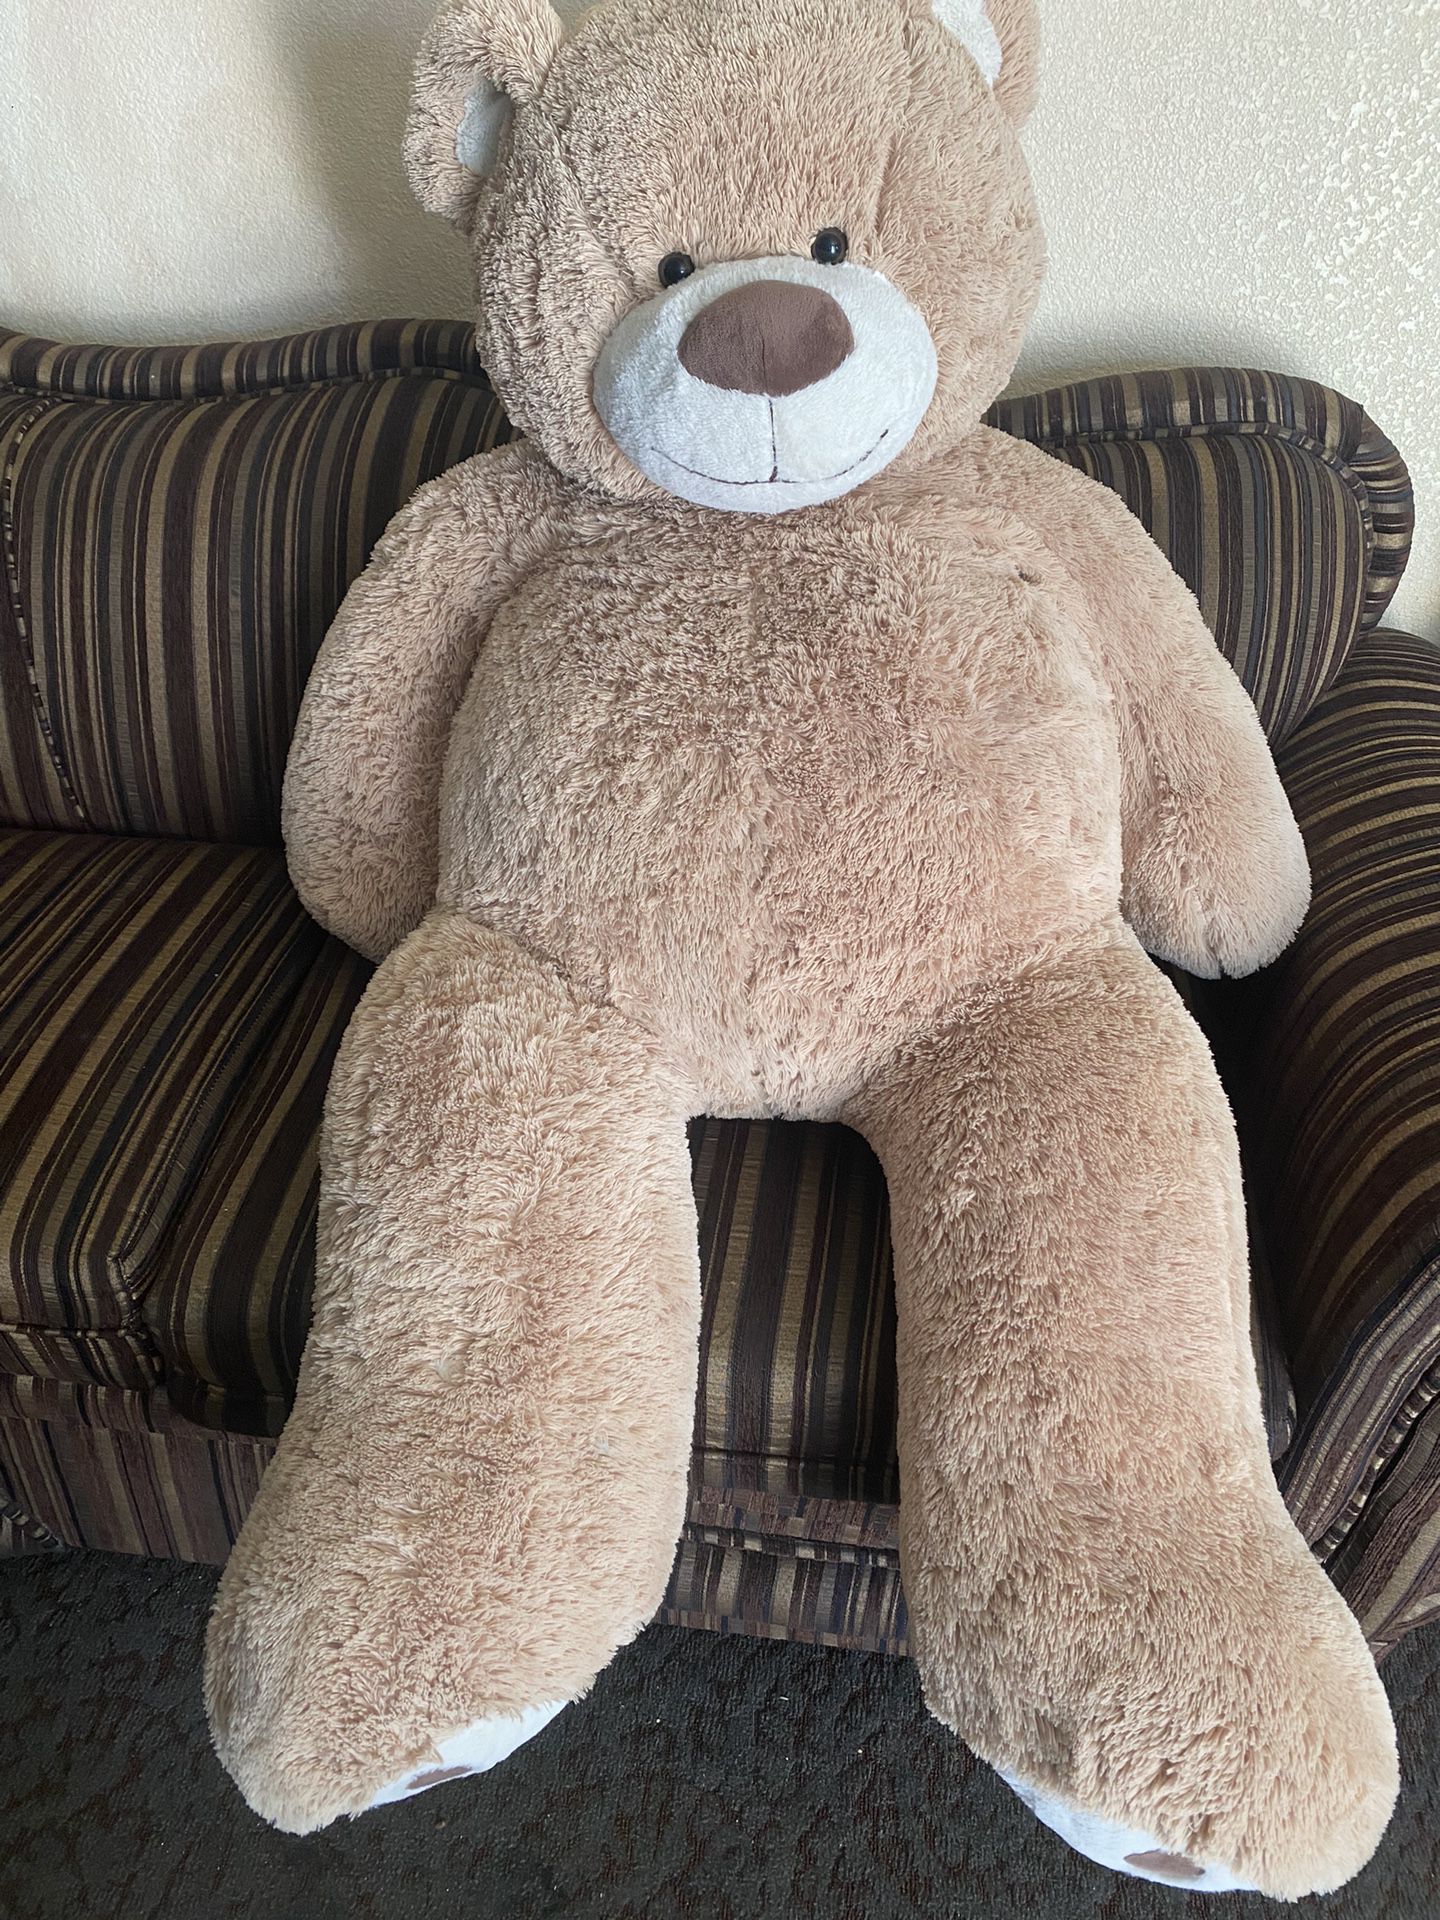 Giant Teddy Bear Great For Baby Shower Decor 